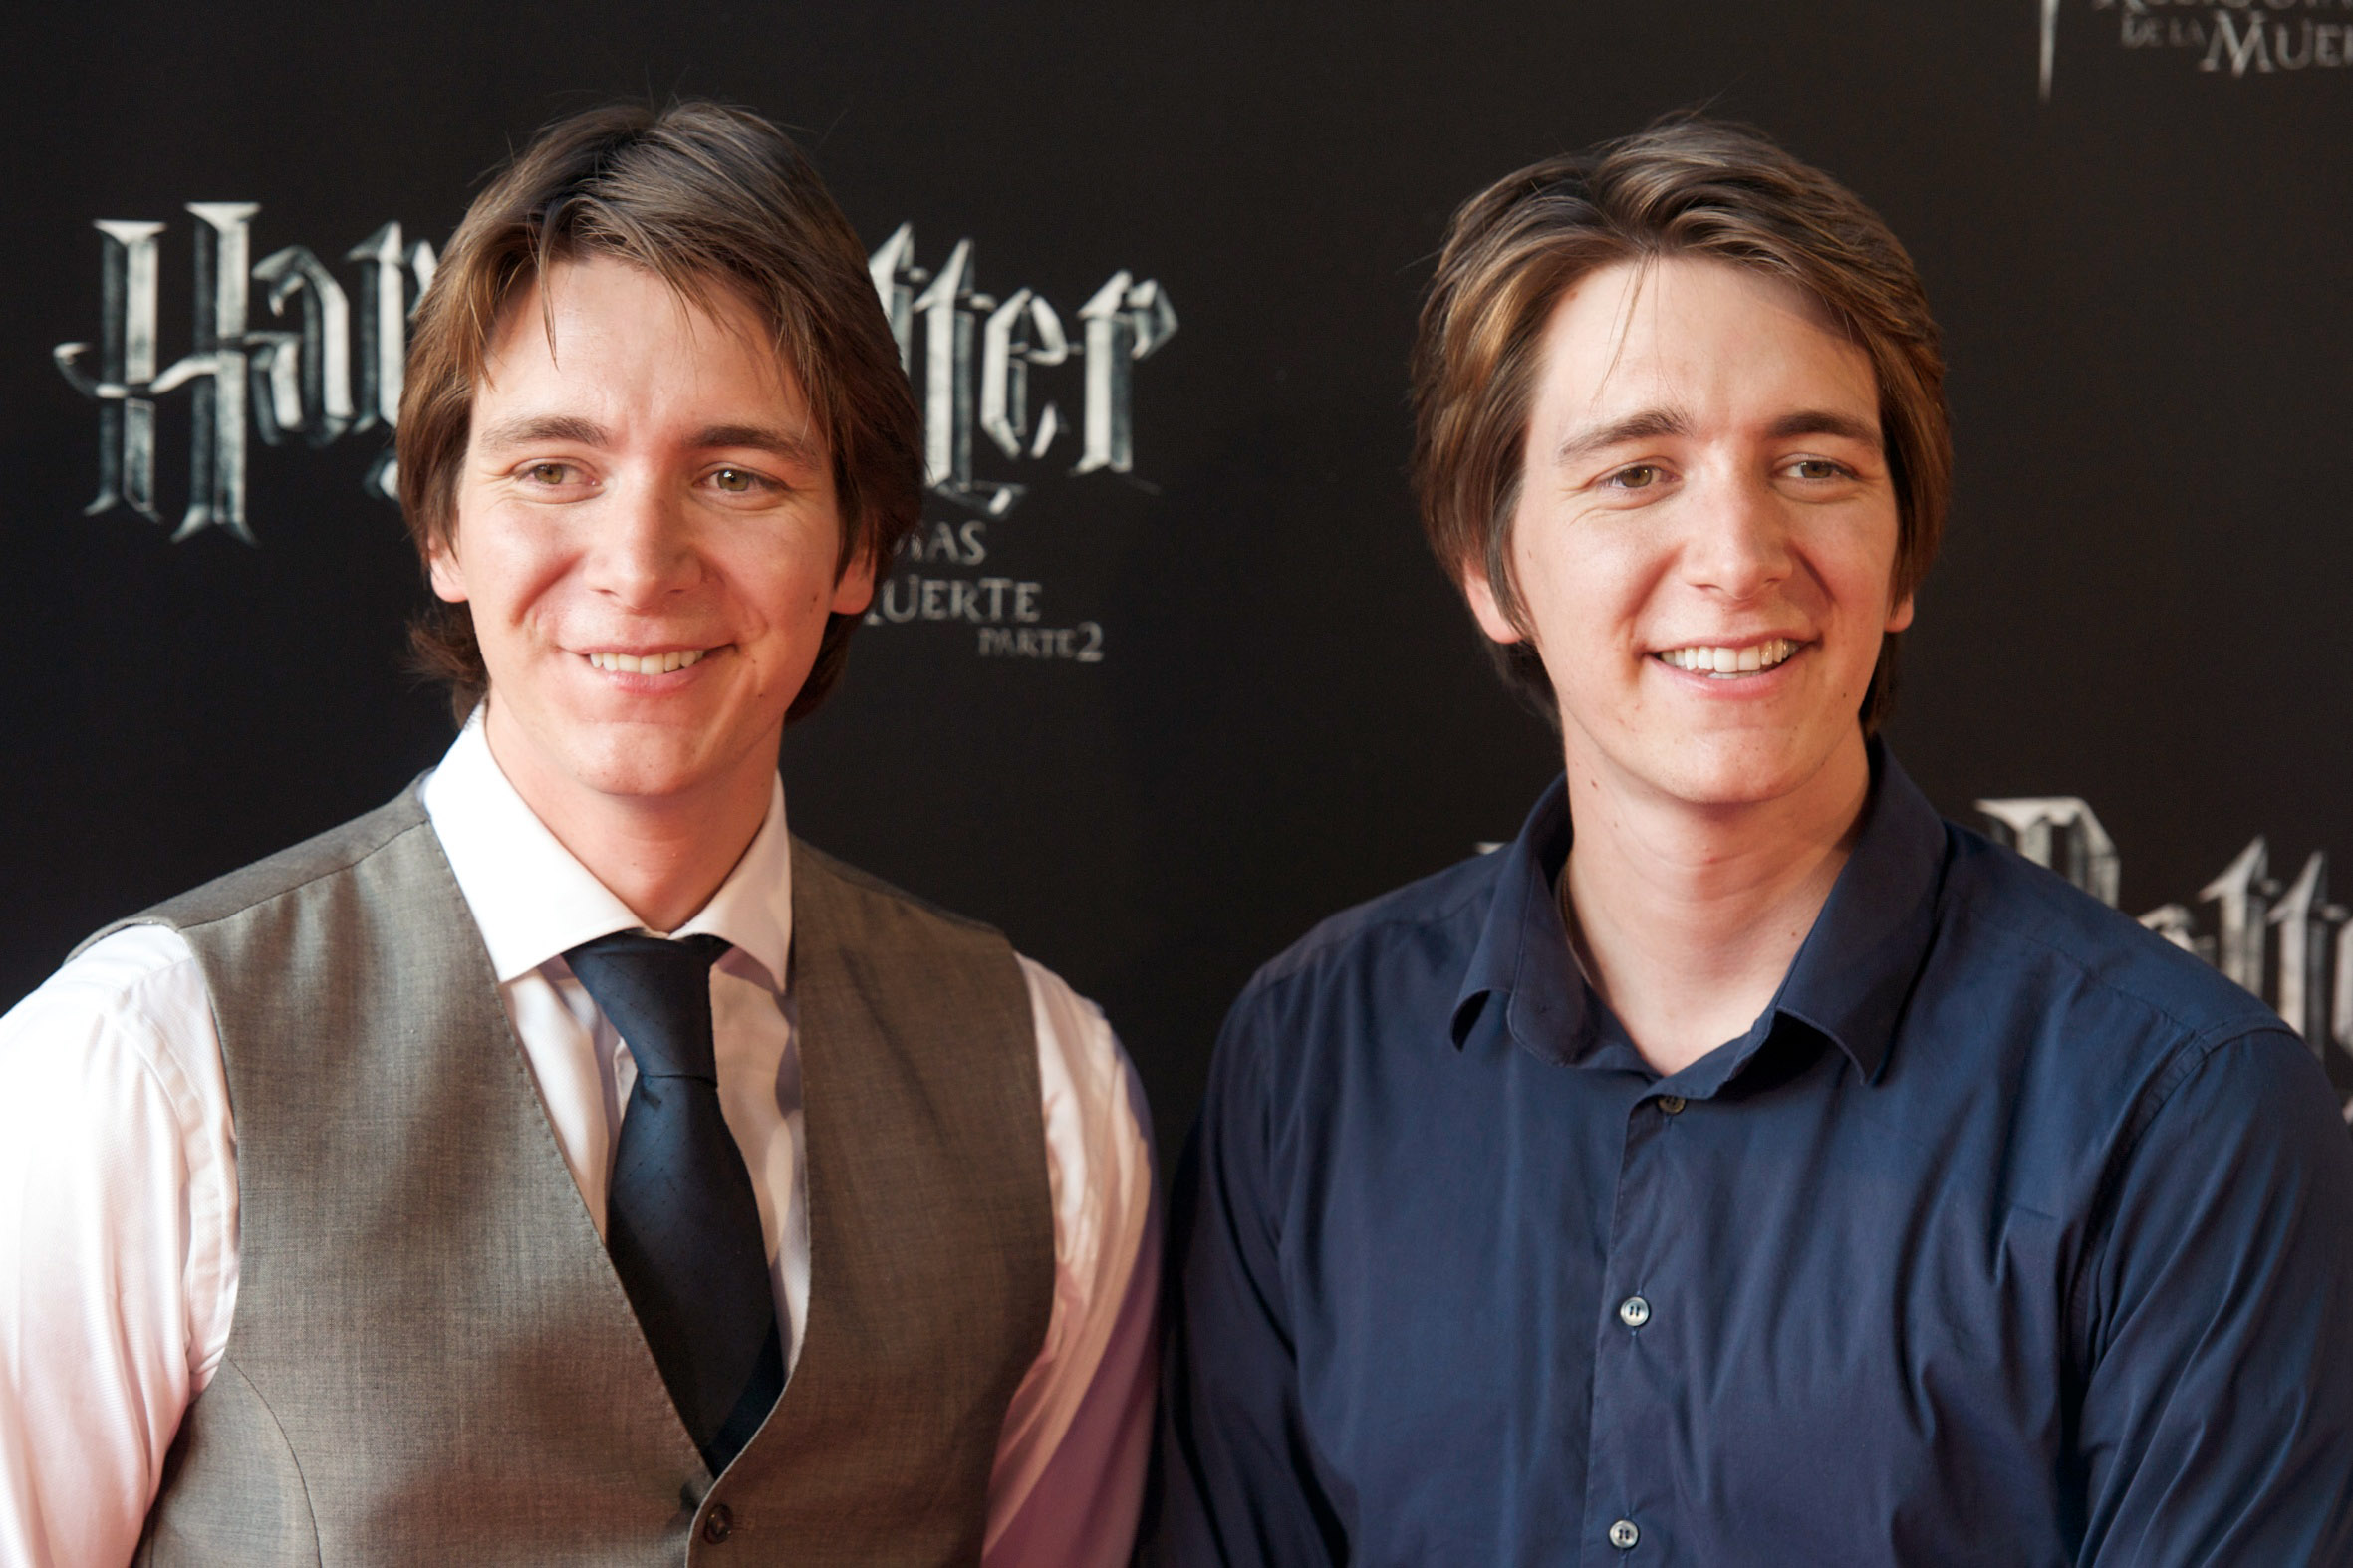 James Phelps and Oliver Phelps attend the Madrid premiere for Harry Potter and the Deathly Hallows: Part 2 in 2011